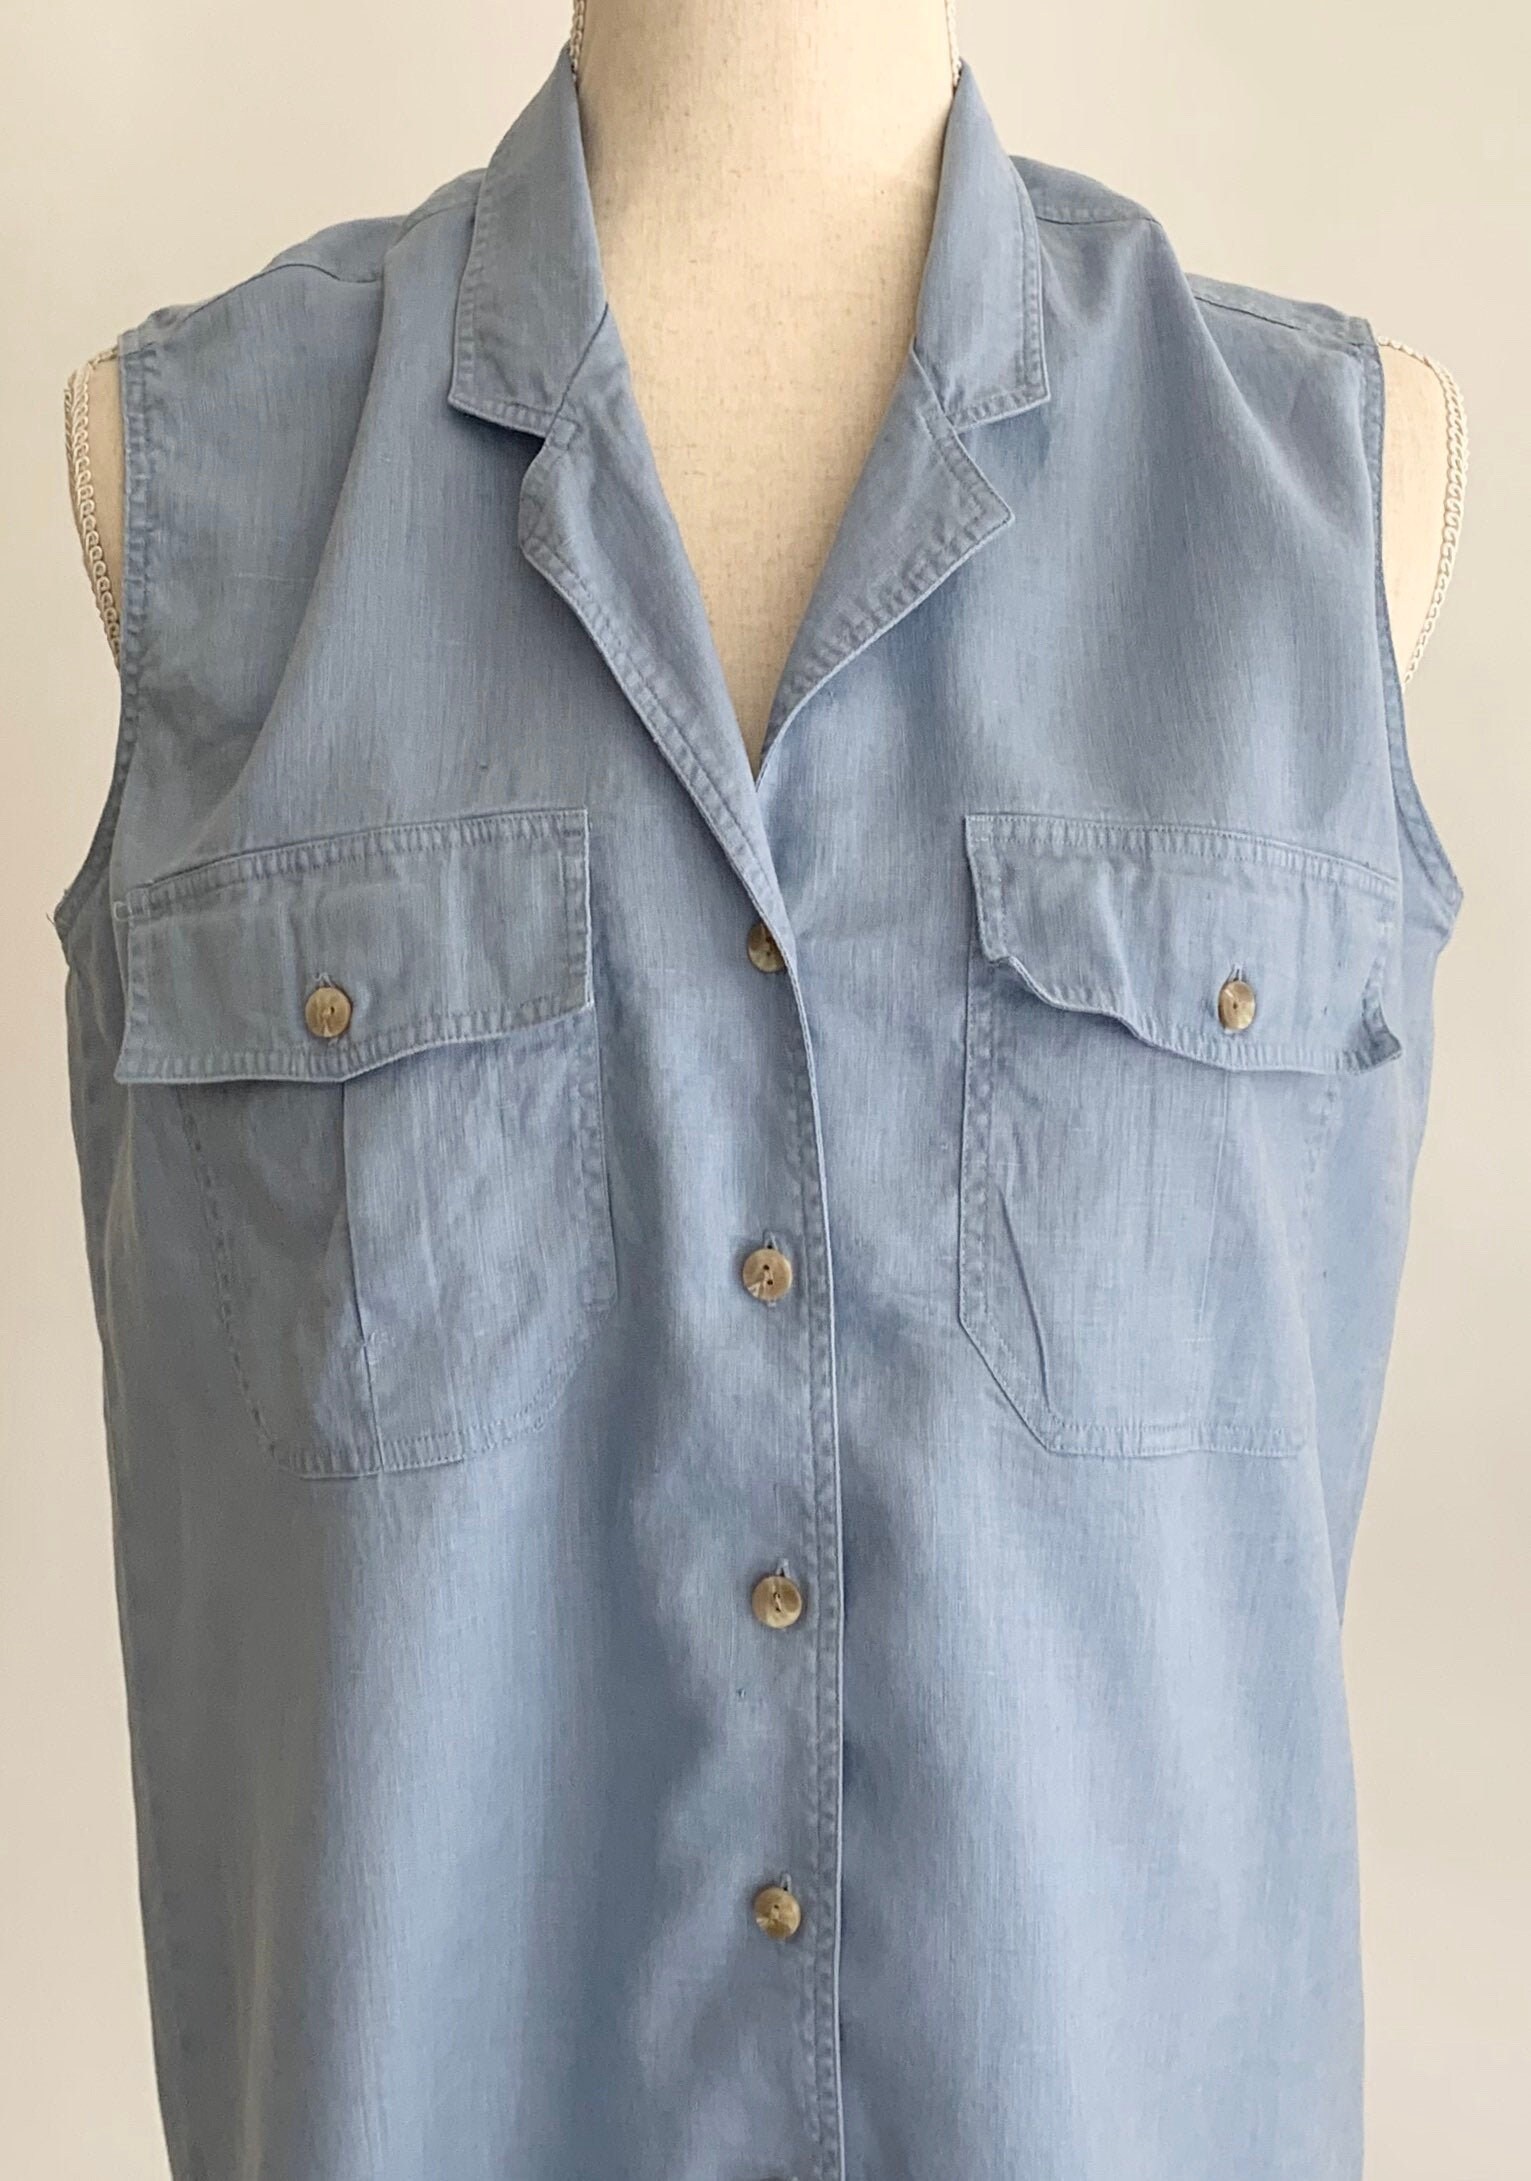 Linen Sleeveless Shirt Abercrombie and Fitch Vintage 80's 90s Made in ...